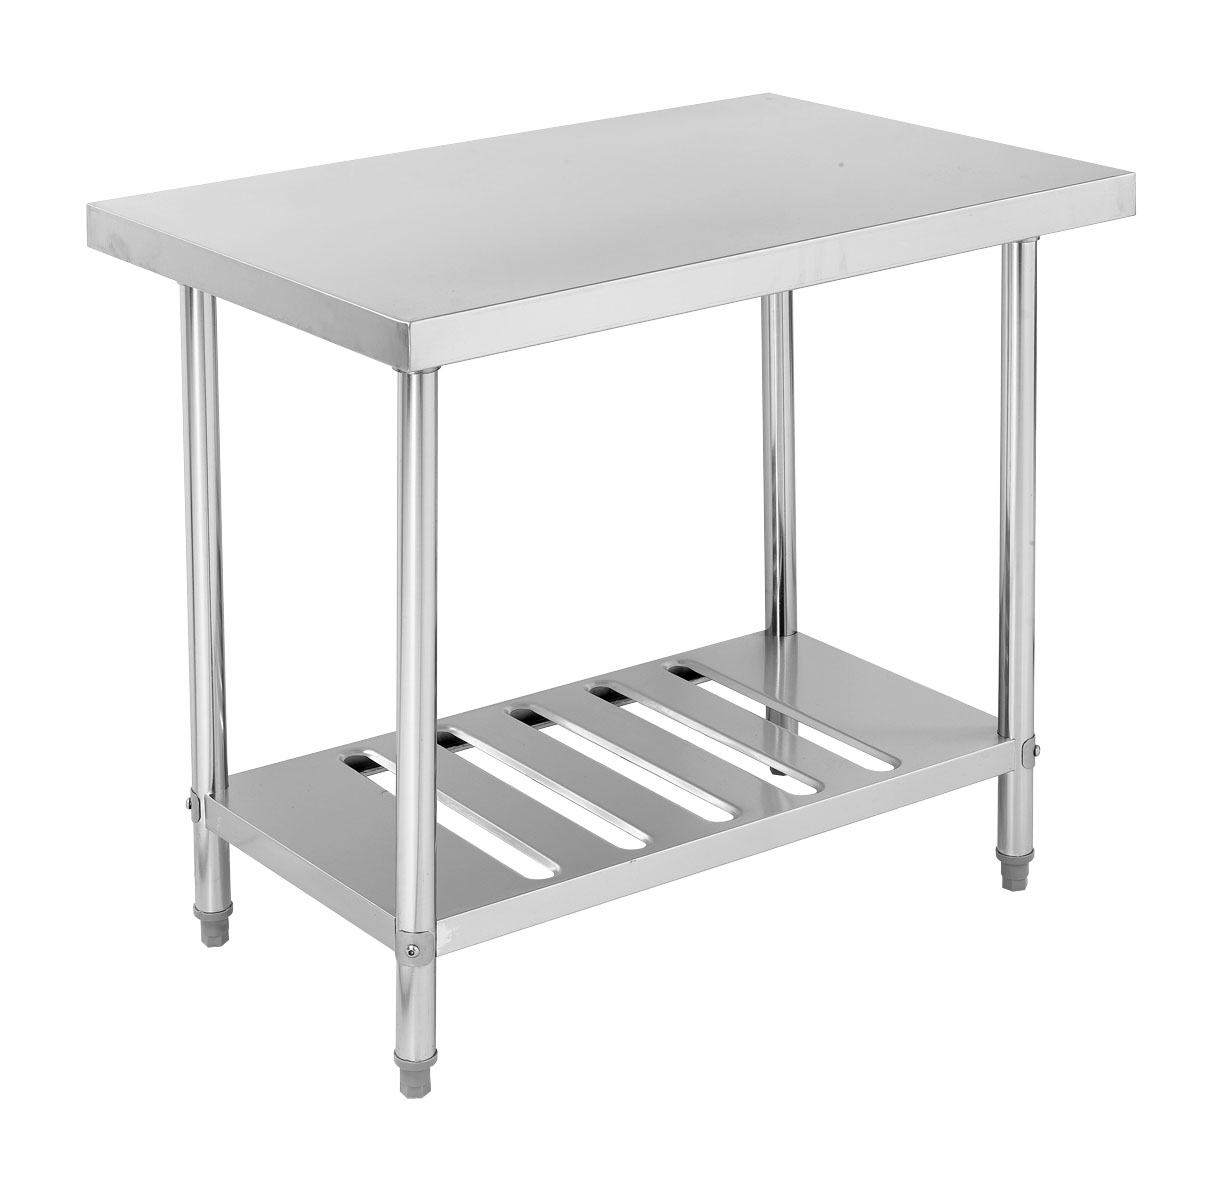 Buffet preparation table Catering kitchen food prep bench counter 900x700mm